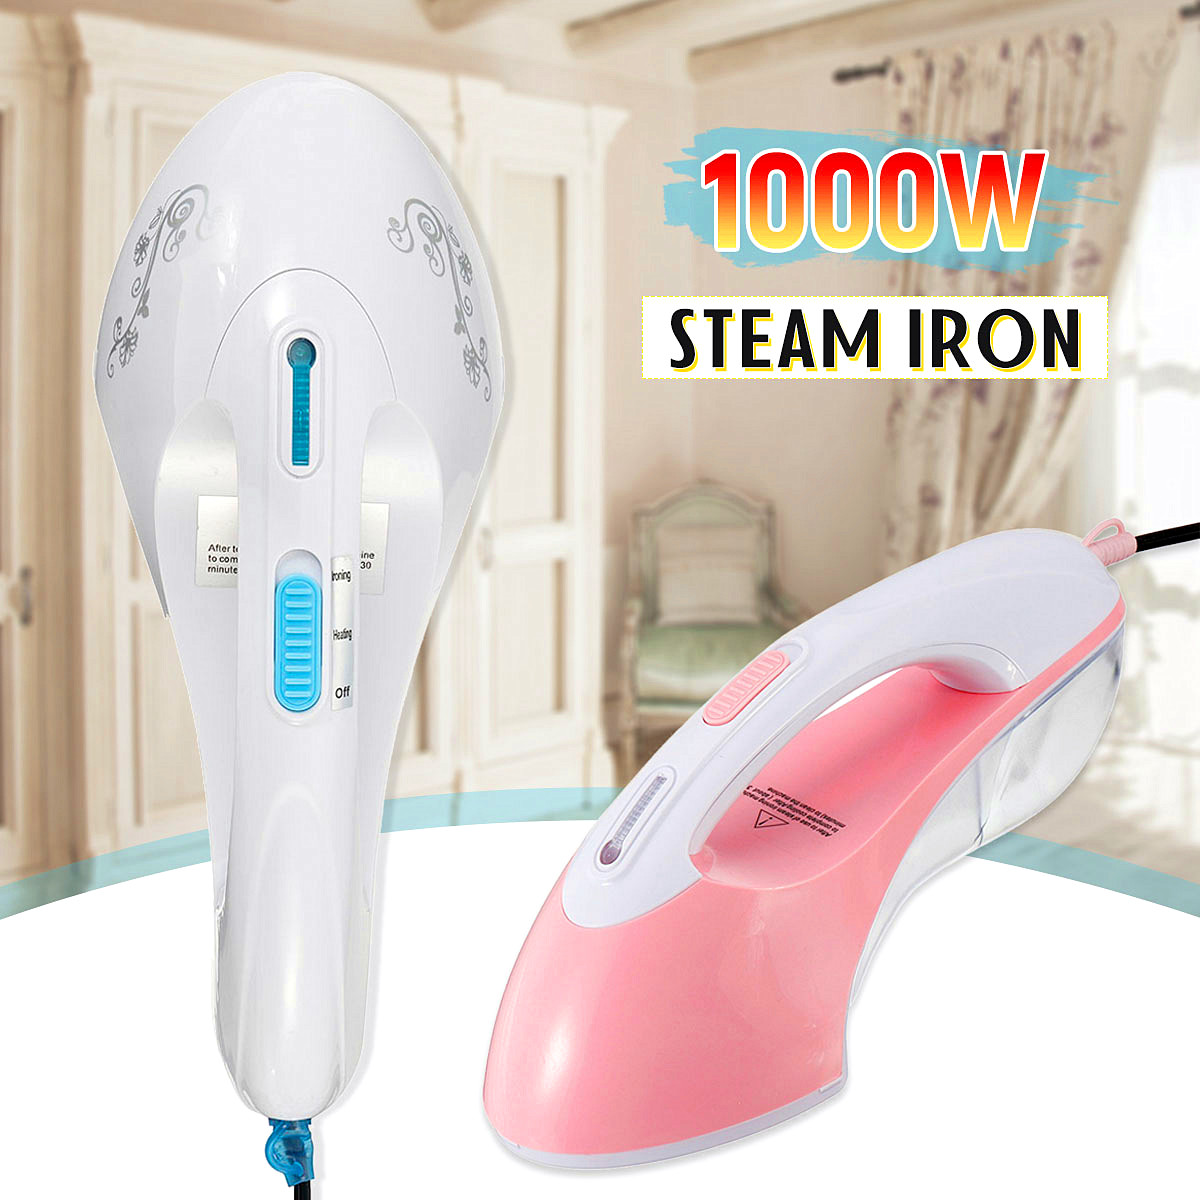 110V-1000W-Handheld-Electric-Steam-Iron-Fabric-Clothes-Garment-Steamer-Dry-Flat-1500430-2